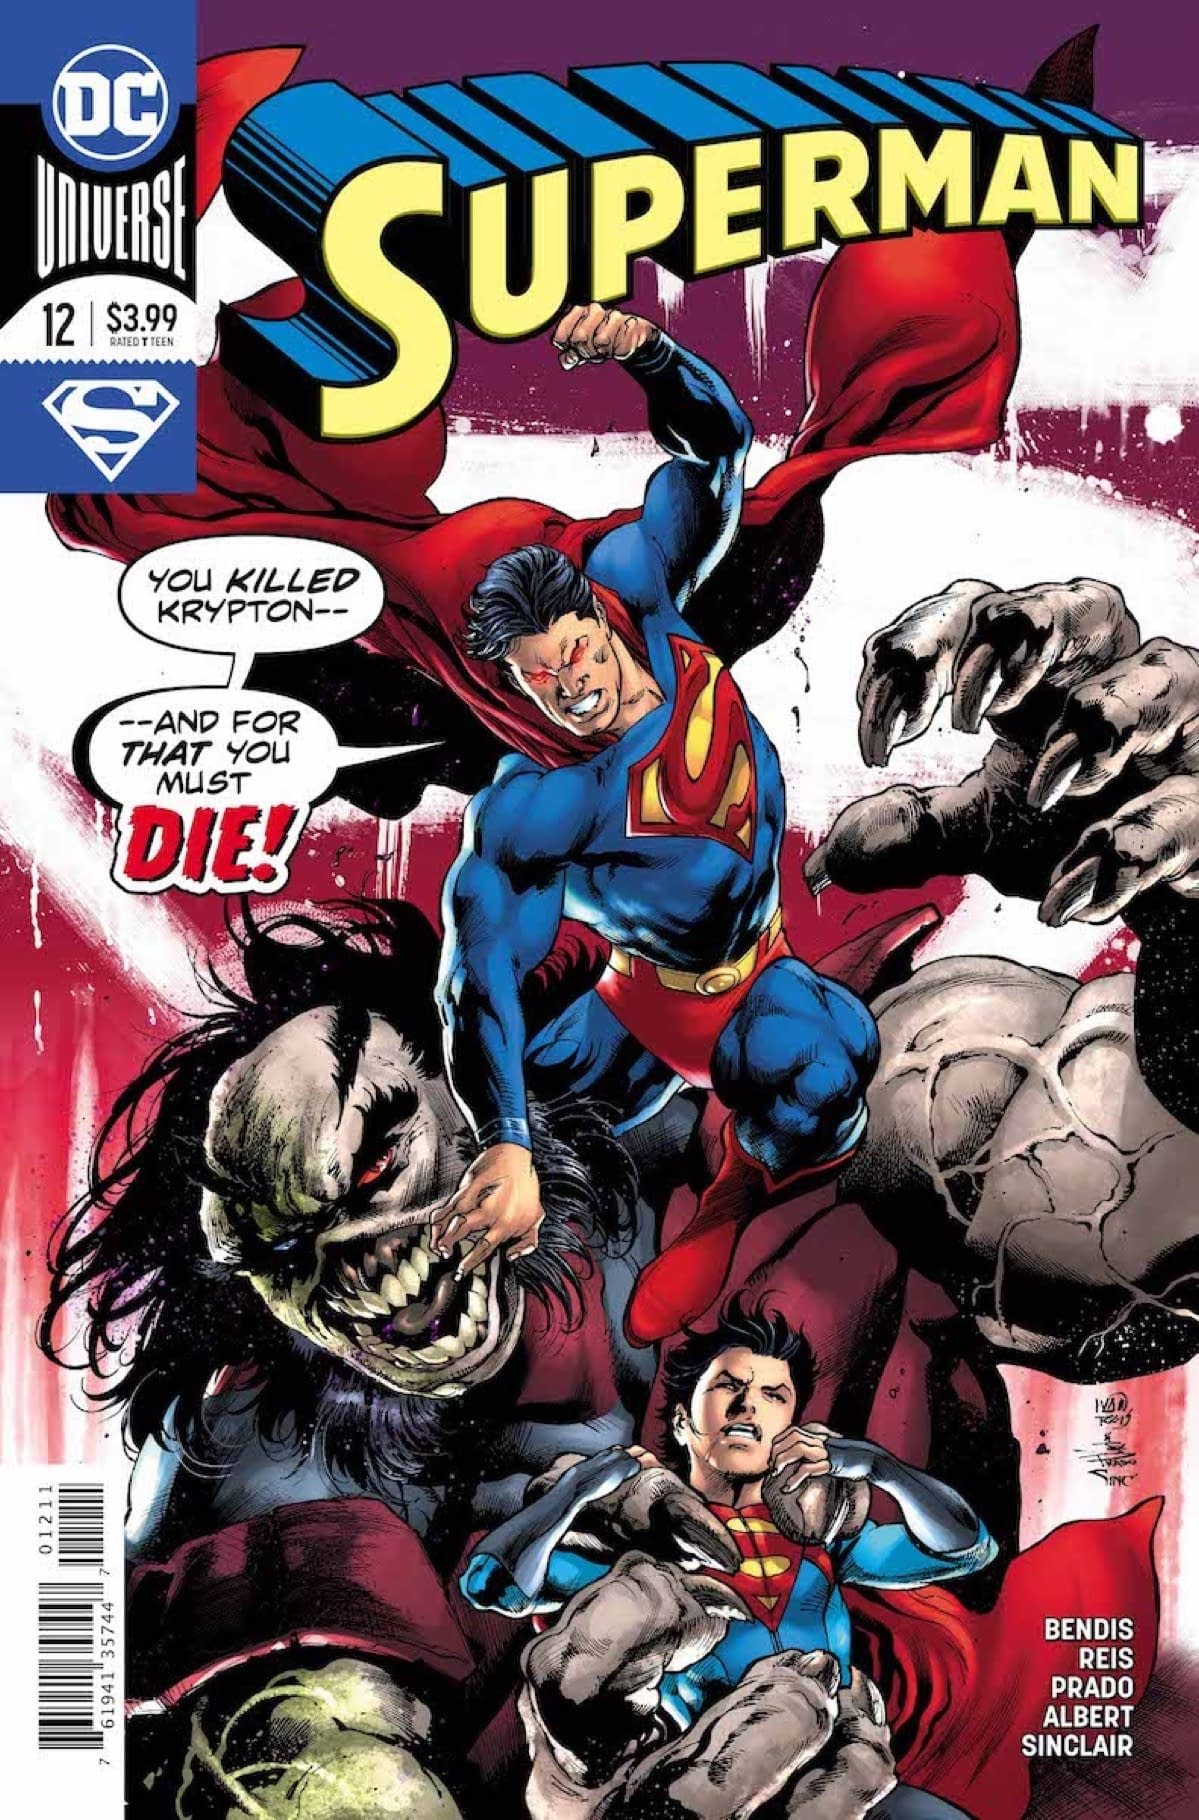 Superman #12 Preview